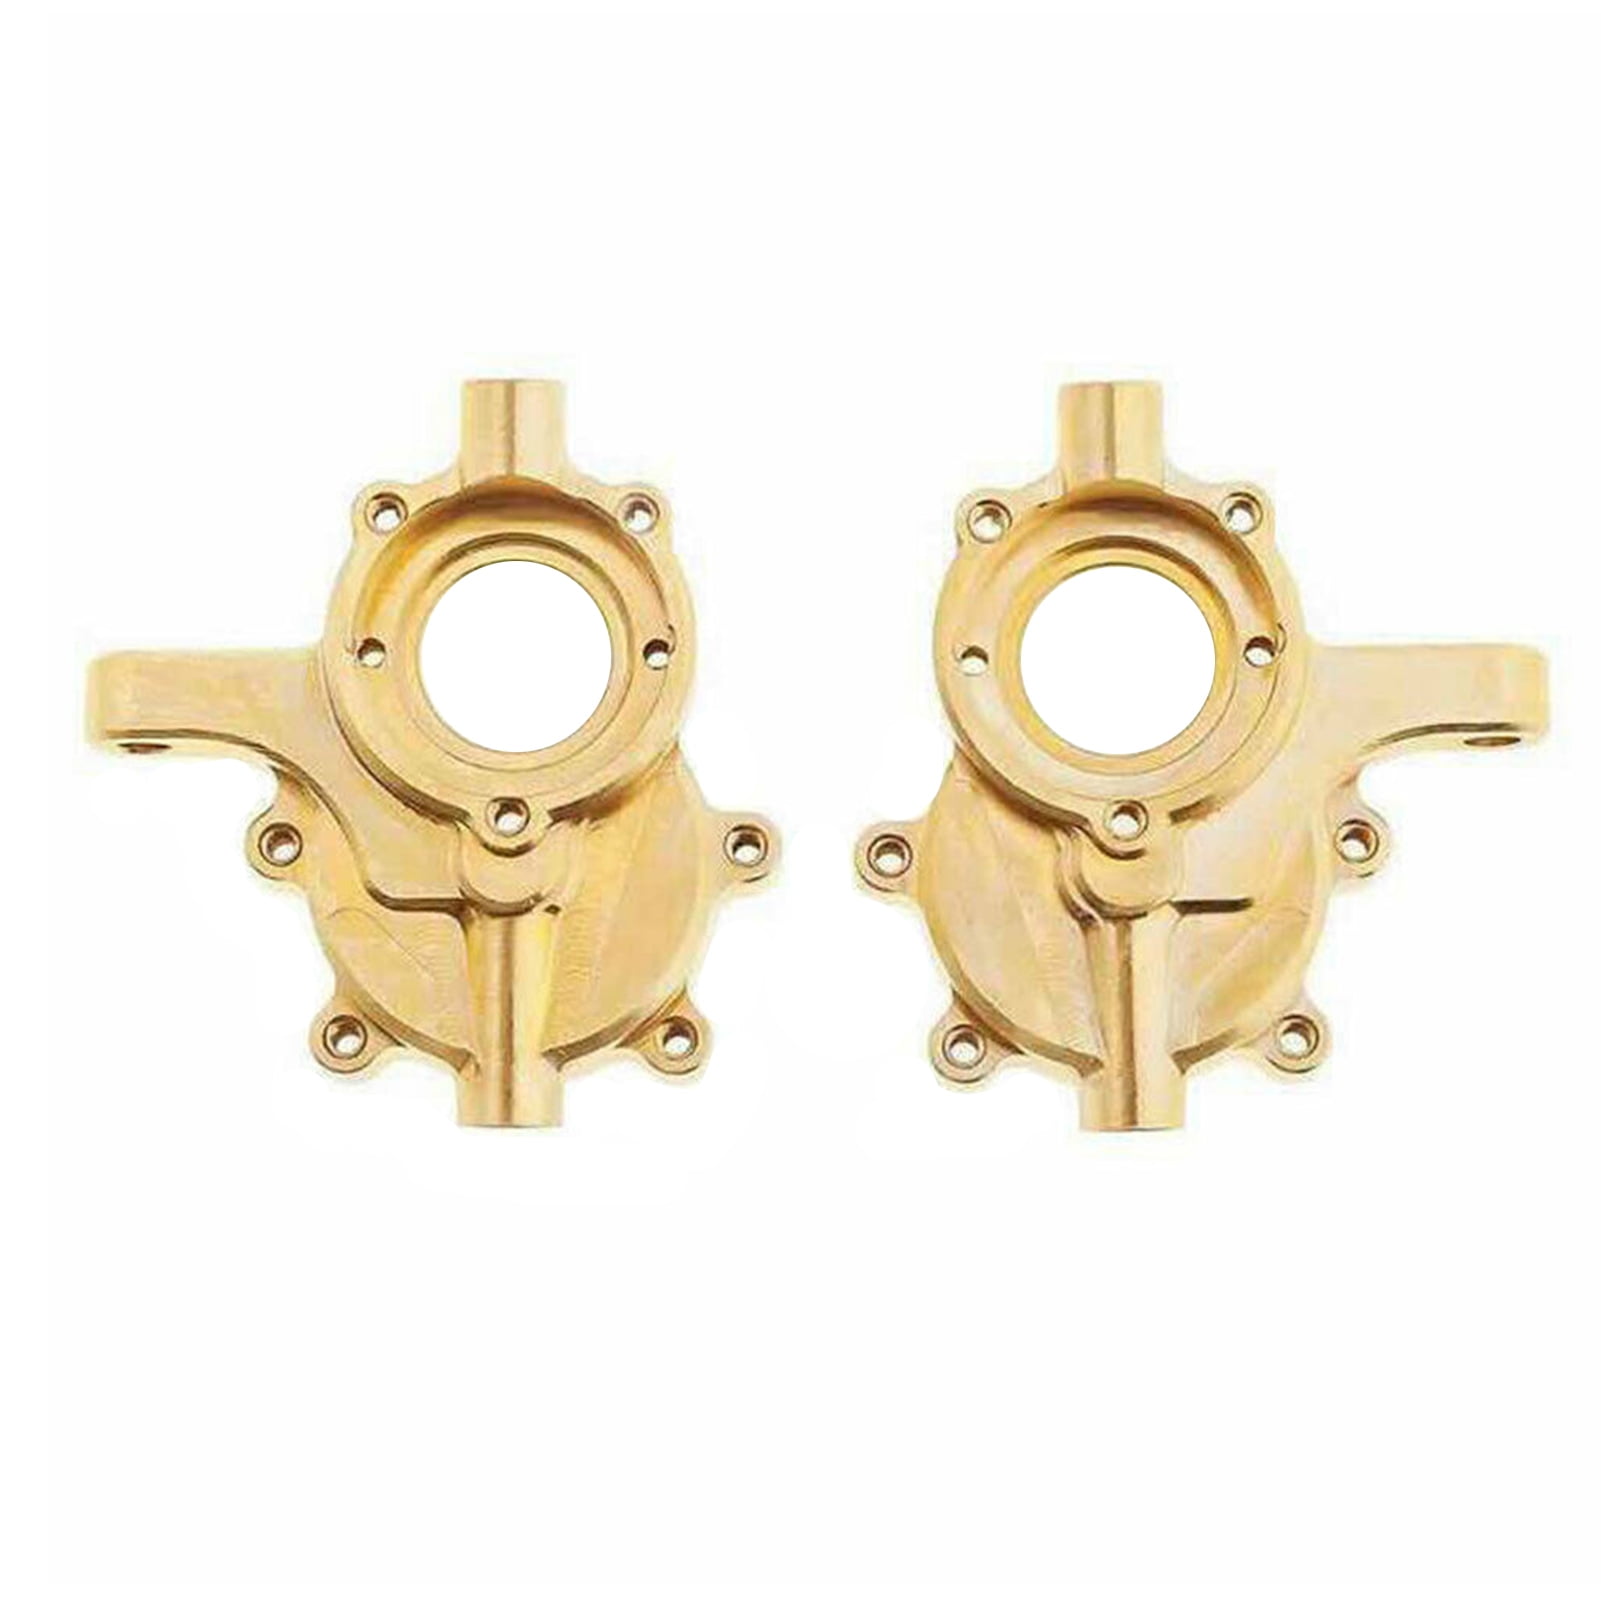 Pair Brass Gear Cover Outer Portal Housing RC Car Upgrade Parts For Redcat GEN 8